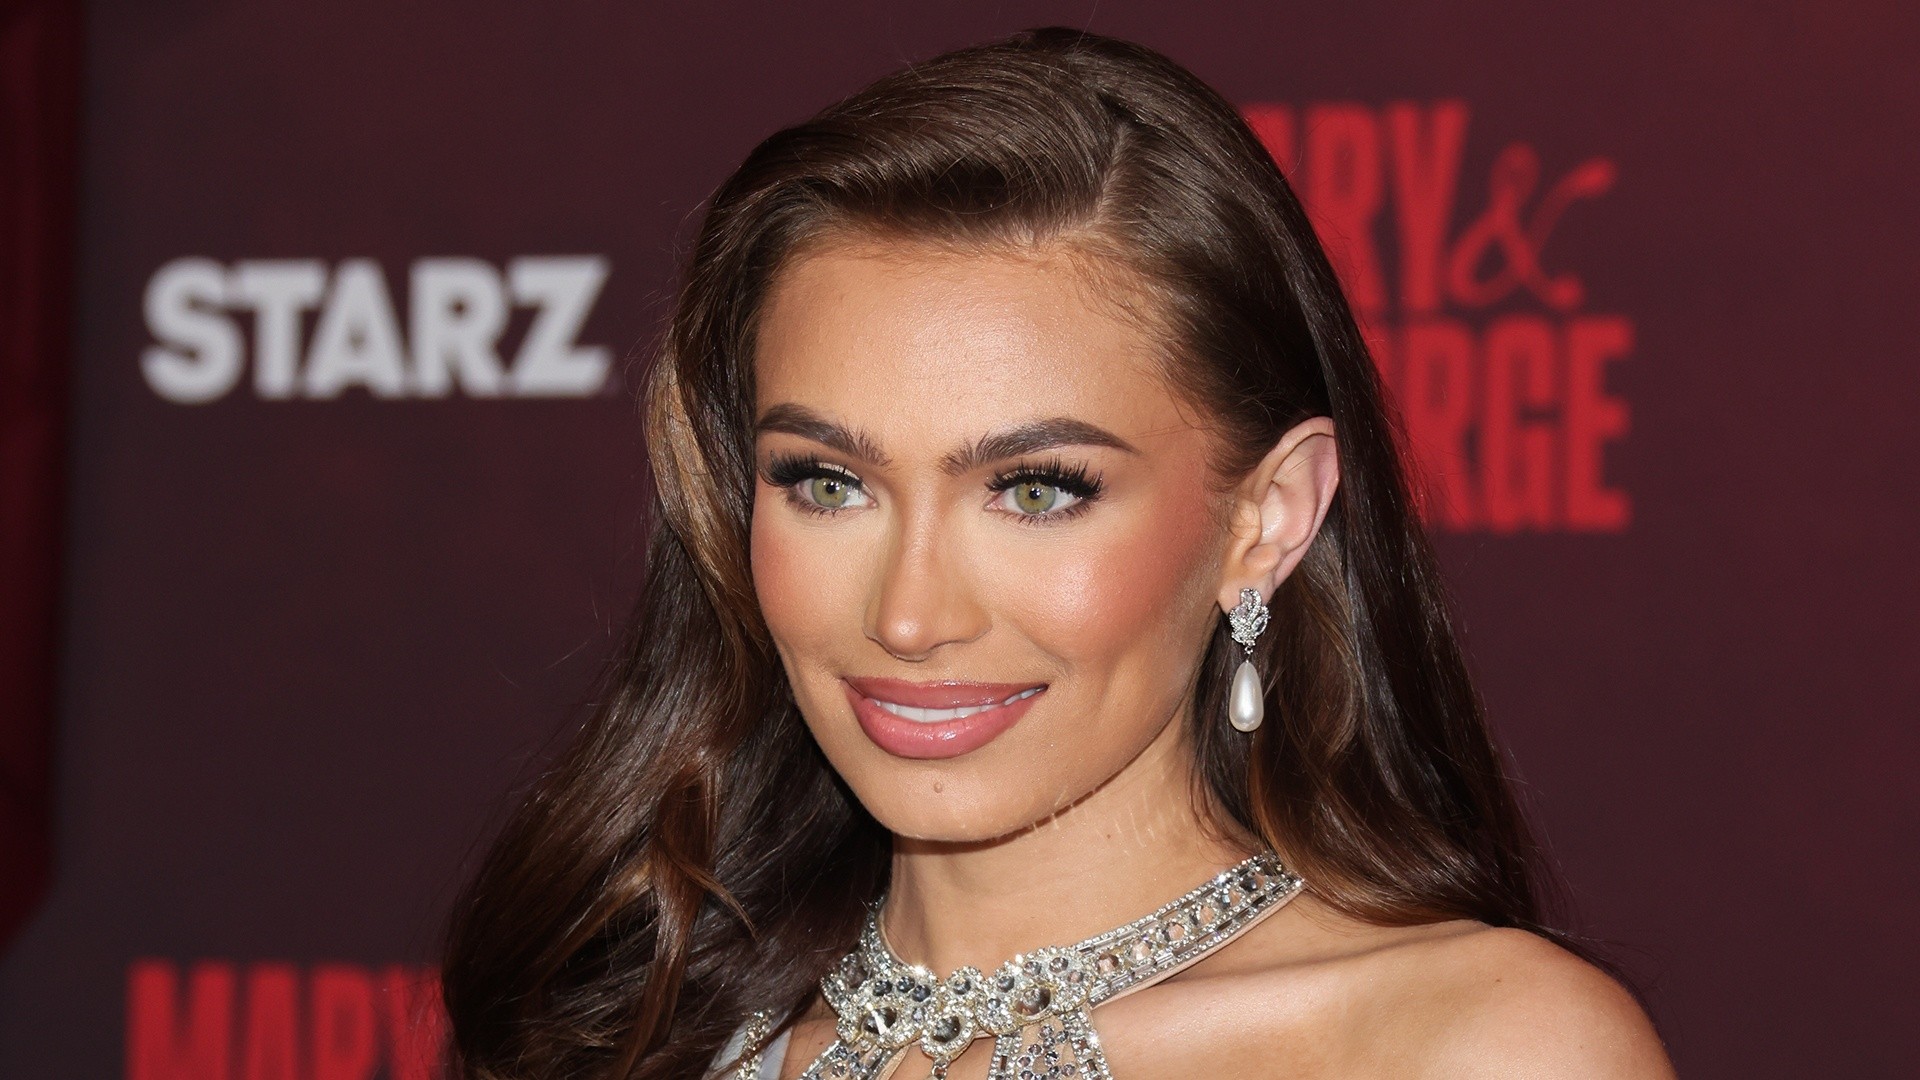 Miss USA 2023 Noelia Voigt steps down citing mental health